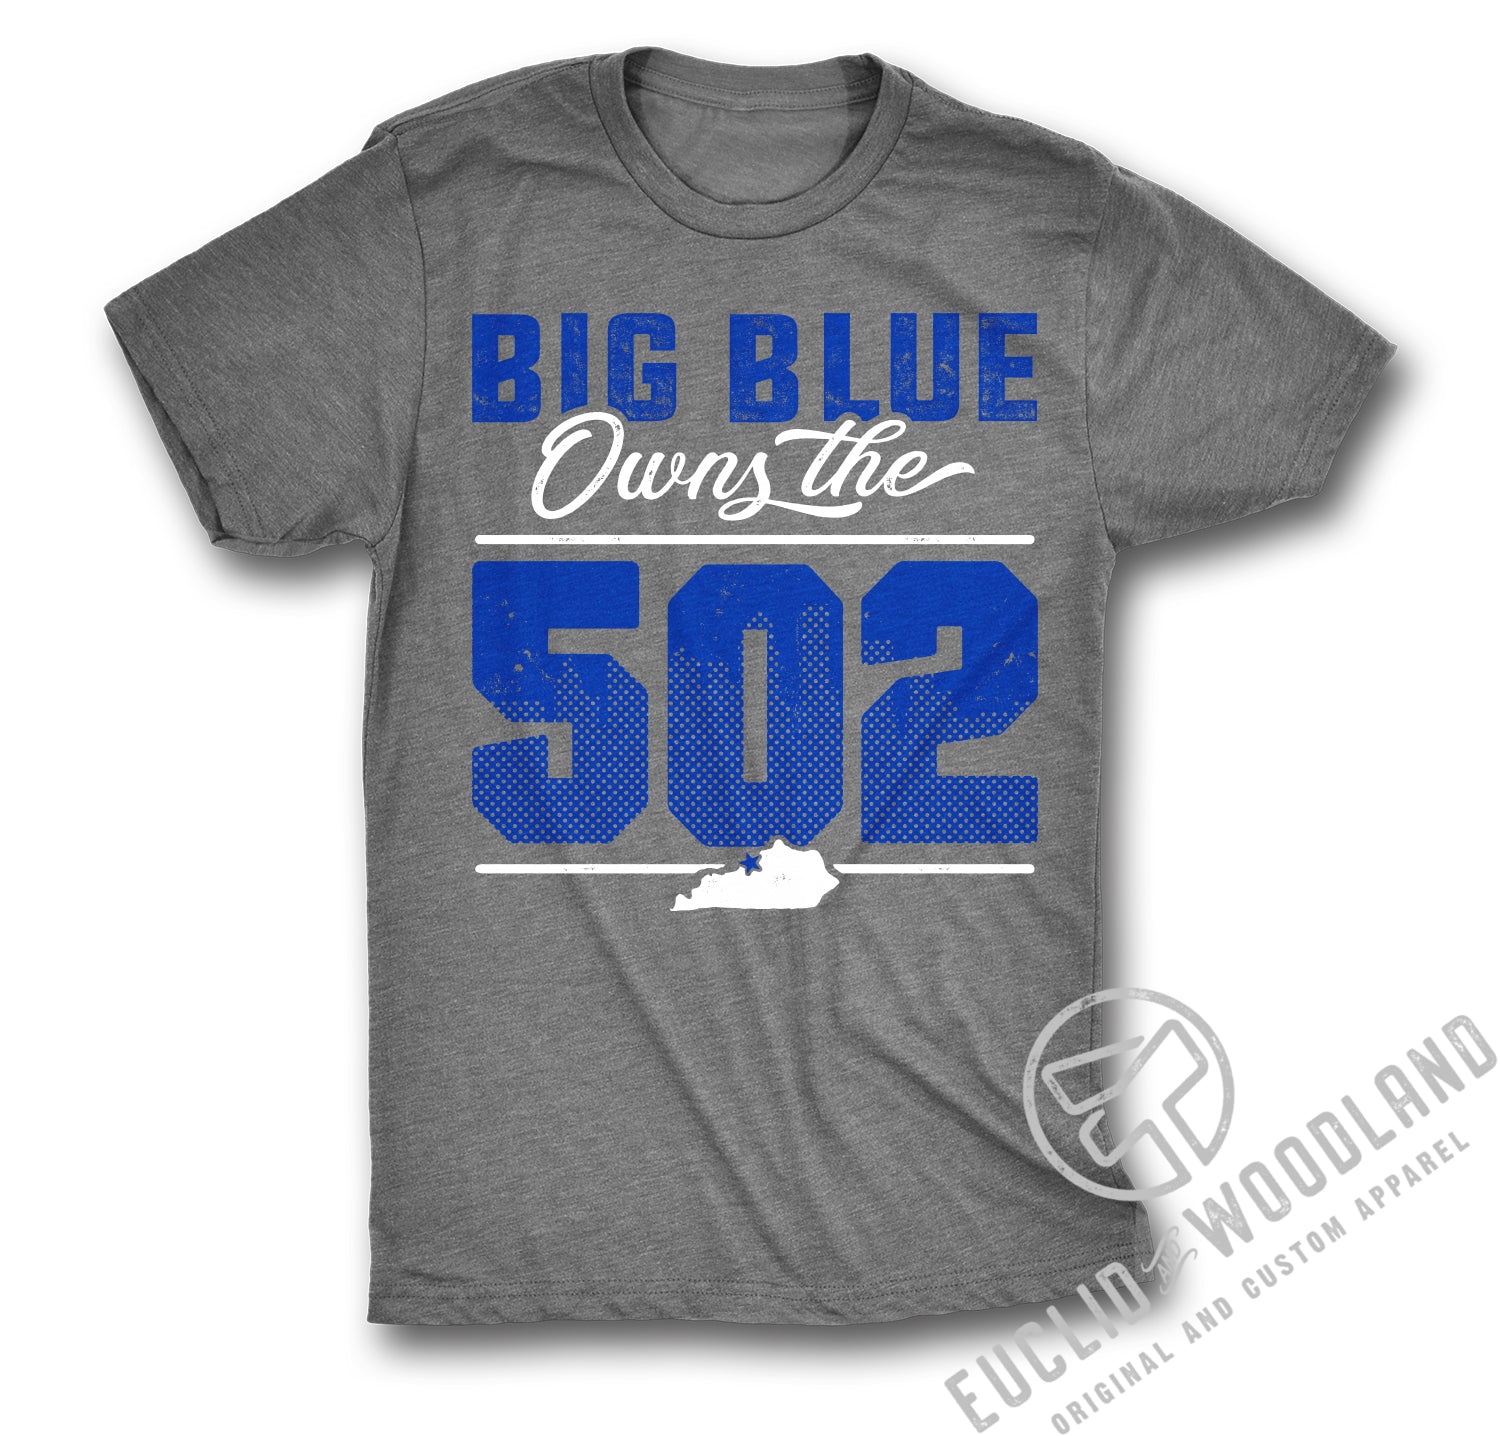 Big Blue Owns the "502" Tee